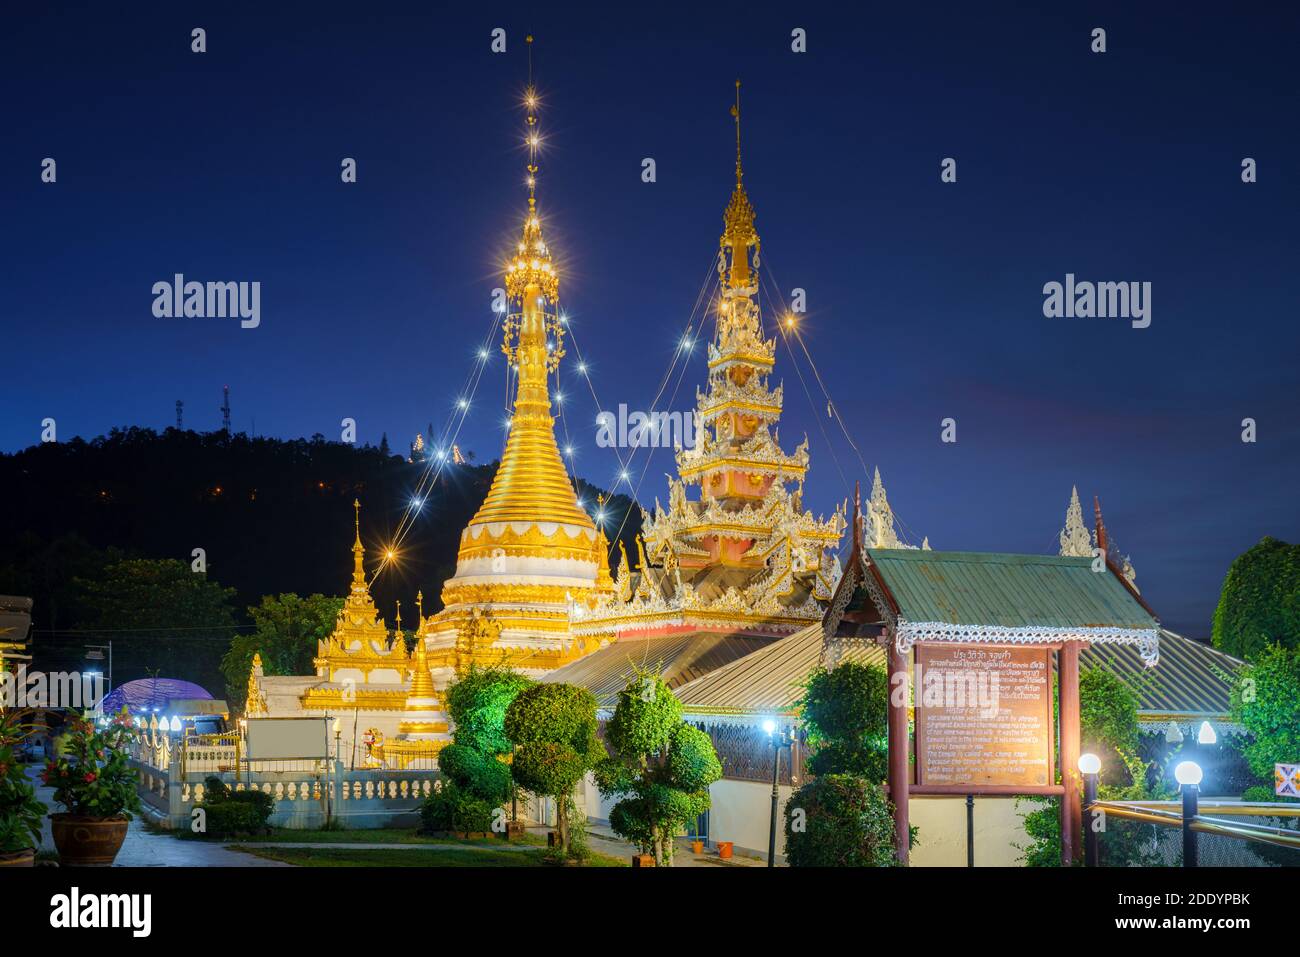 Wat Jongklang Temple and Wat Jongkham Temple is the most attention place for tourist with sunset sky in Mae Hong Son near Chiang mai, Thailand Stock Photo